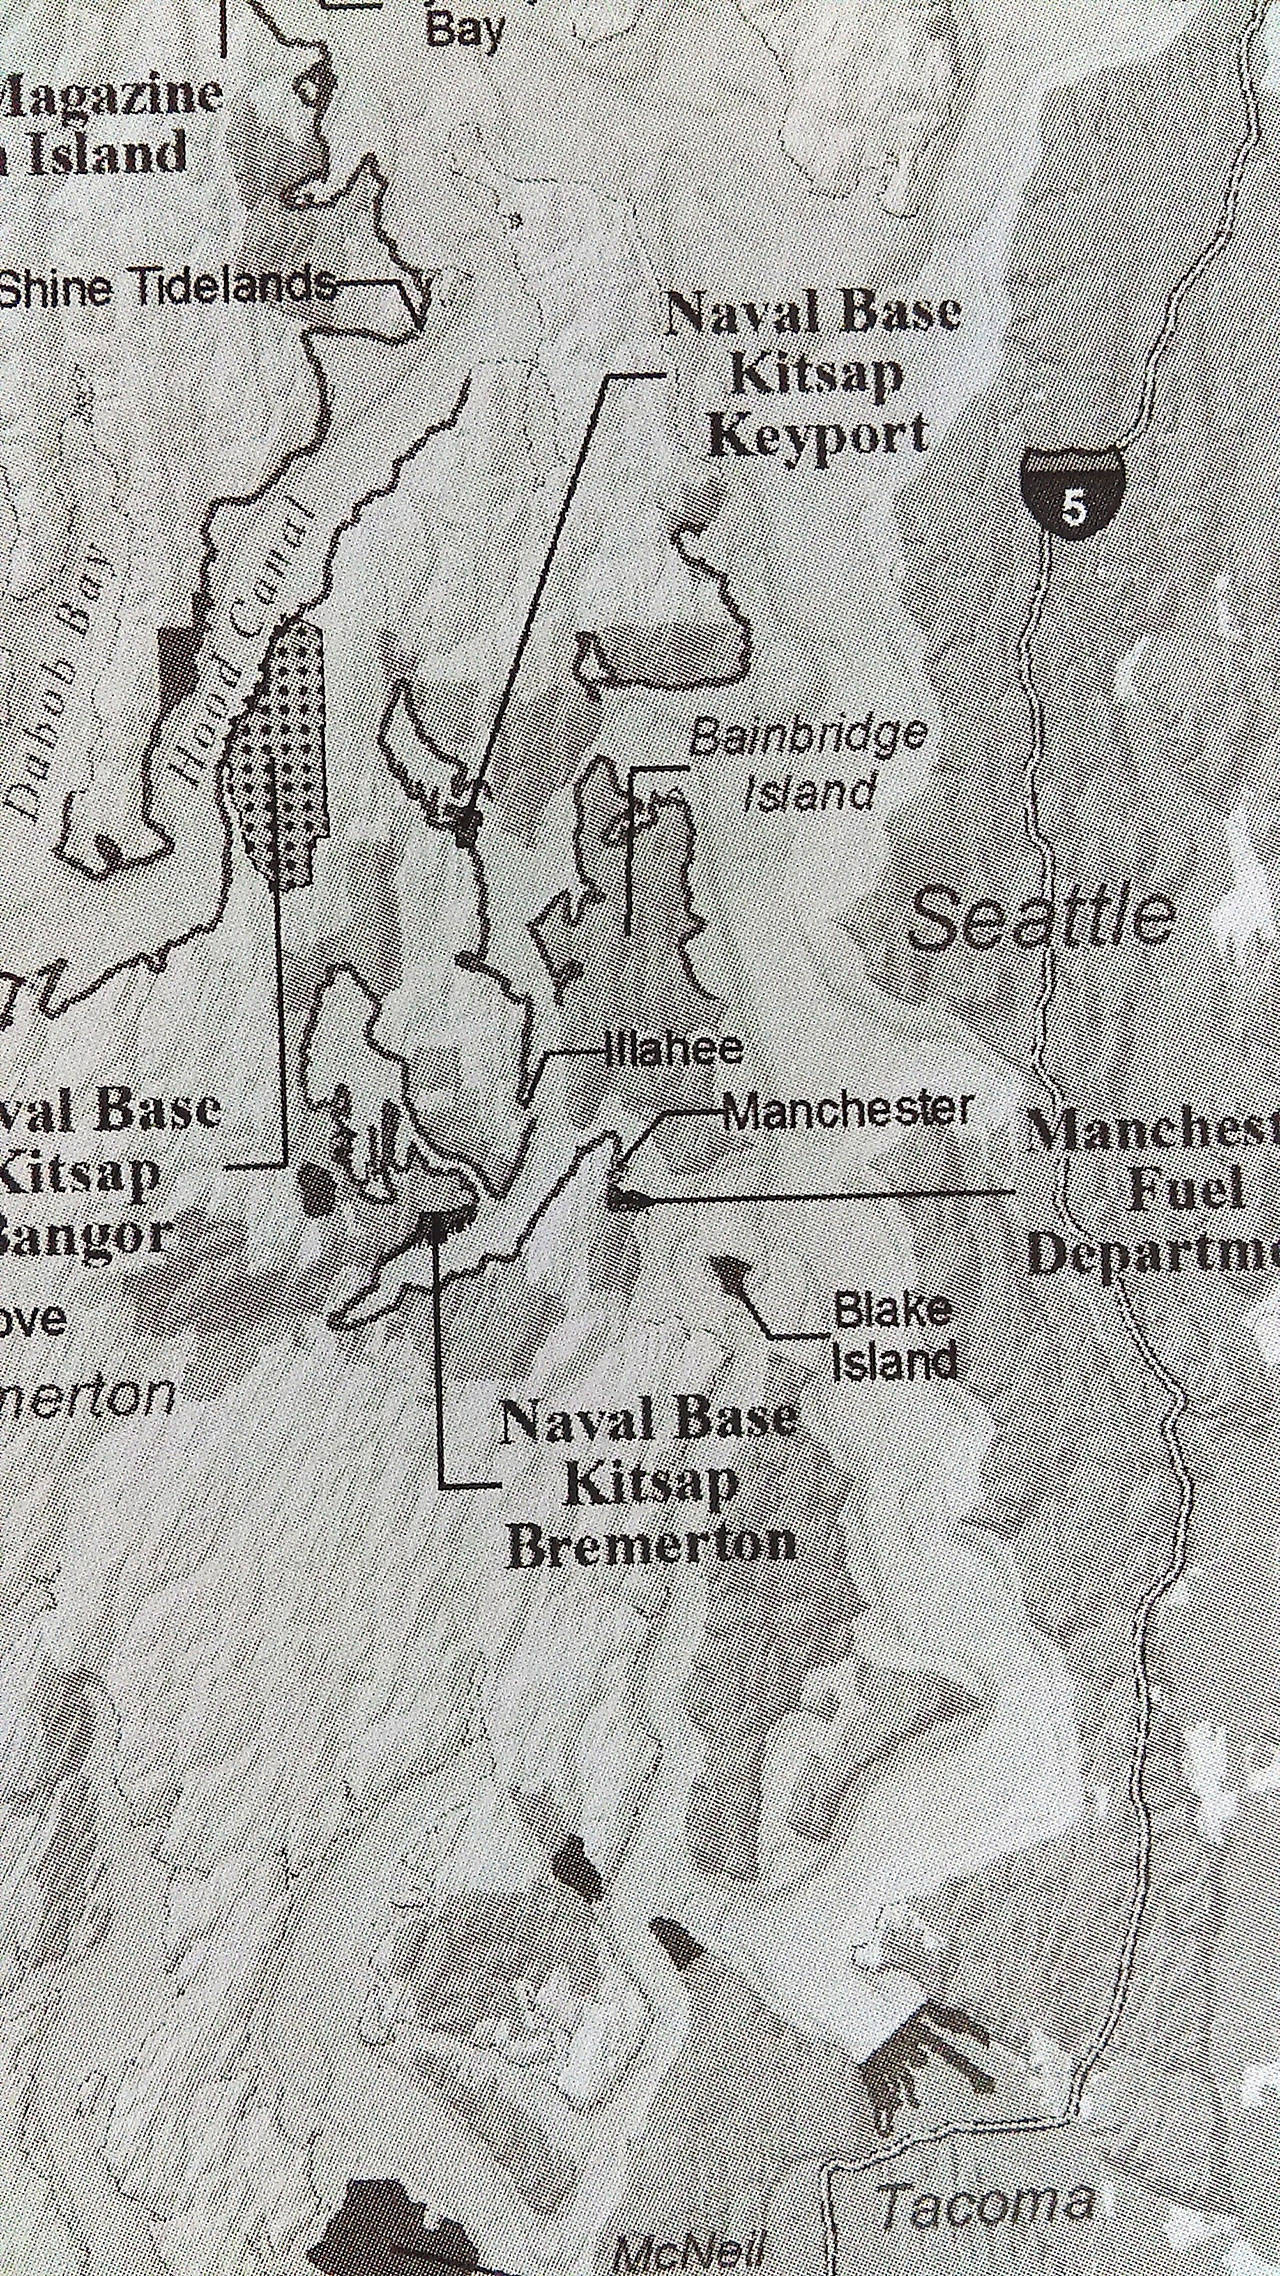 Image courtesy of U.S. Navy | Navy personnel have announced they will be utilizing select areas of Kitsap County shoreline - including, potentially, on Bainbridge Island - to conduct special operations training scenarios.                                 Image courtesy of U.S. Navy | Navy personnel have announced they will be utilizing select areas of Kitsap County shoreline - including, potentially, on Bainbridge Island - to conduct special operations training scenarios.                                 Image courtesy of U.S. Navy | Navy personnel have announced they will be utilizing select areas of Kitsap County shoreline - including, potentially, on Bainbridge Island - to conduct special operations training scenarios.                                 Image courtesy of U.S. Navy | Navy personnel have announced they will be utilizing select areas of Kitsap County shoreline - including, potentially, on Bainbridge Island - to conduct special operations training scenarios.                                 Image courtesy of U.S. Navy | Navy personnel have announced they will be utilizing select areas of Kitsap County shoreline - including, potentially, on Bainbridge Island - to conduct special operations training scenarios.